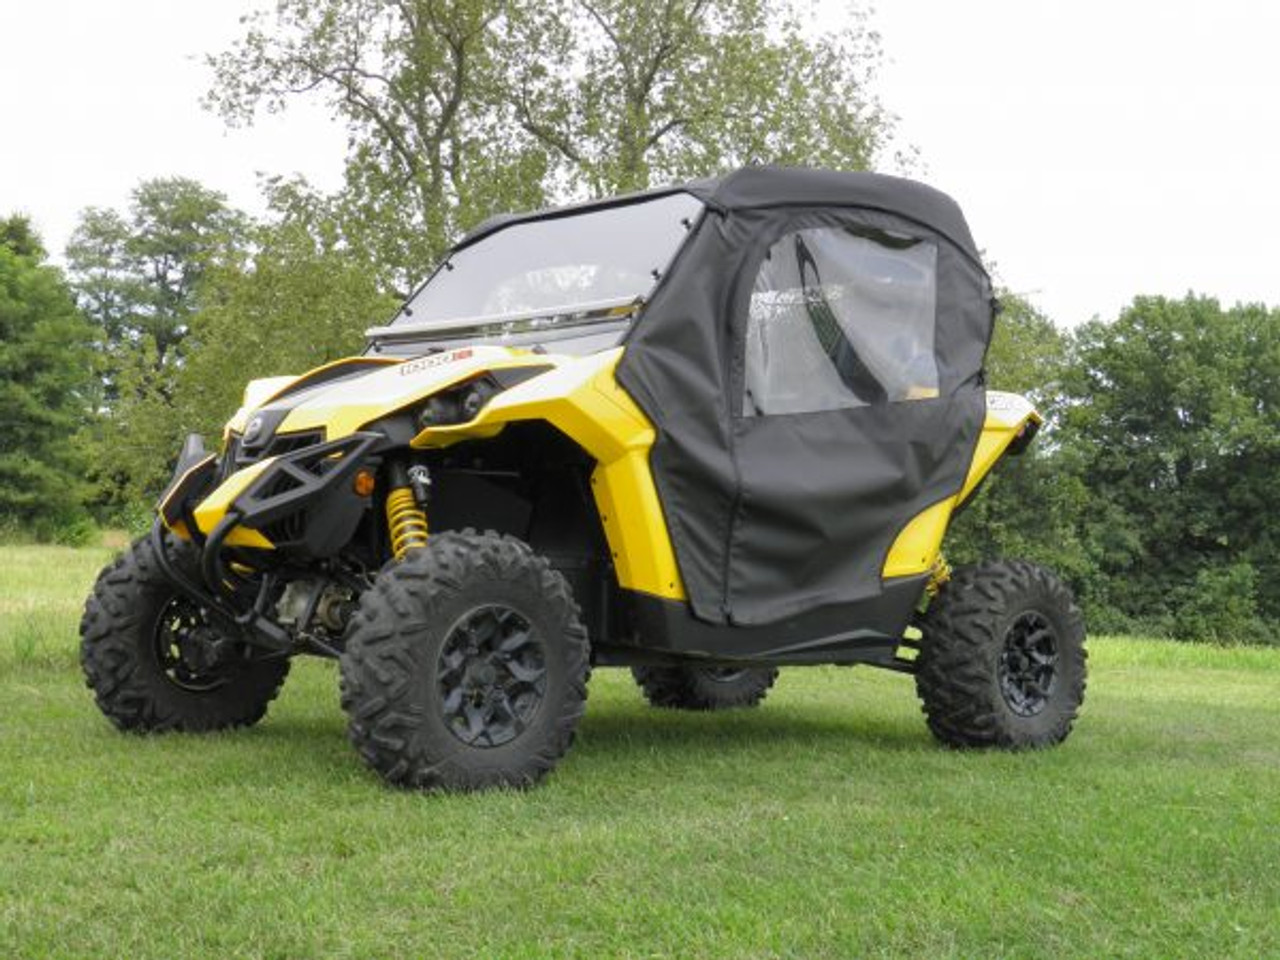 3 Star side x side can-am maverick full cab enclosure side angle view